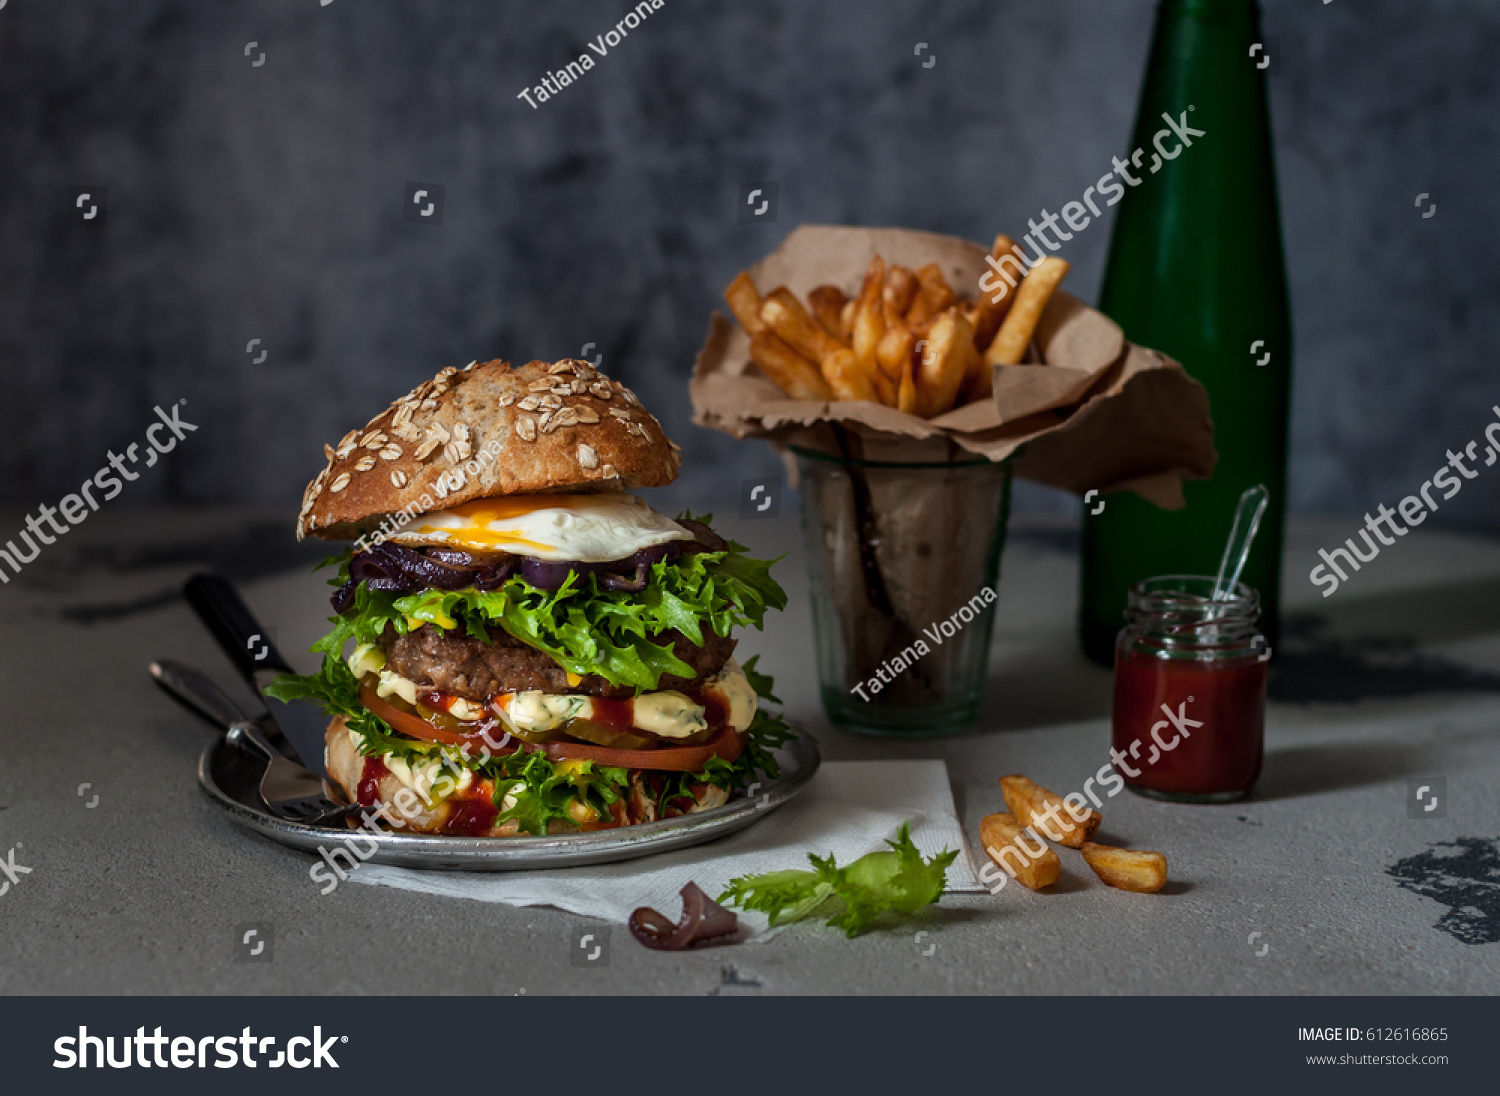 Foodporn Beef Burger with Chips and Sparkling Water, Junk Food, copy space for your text #612616865